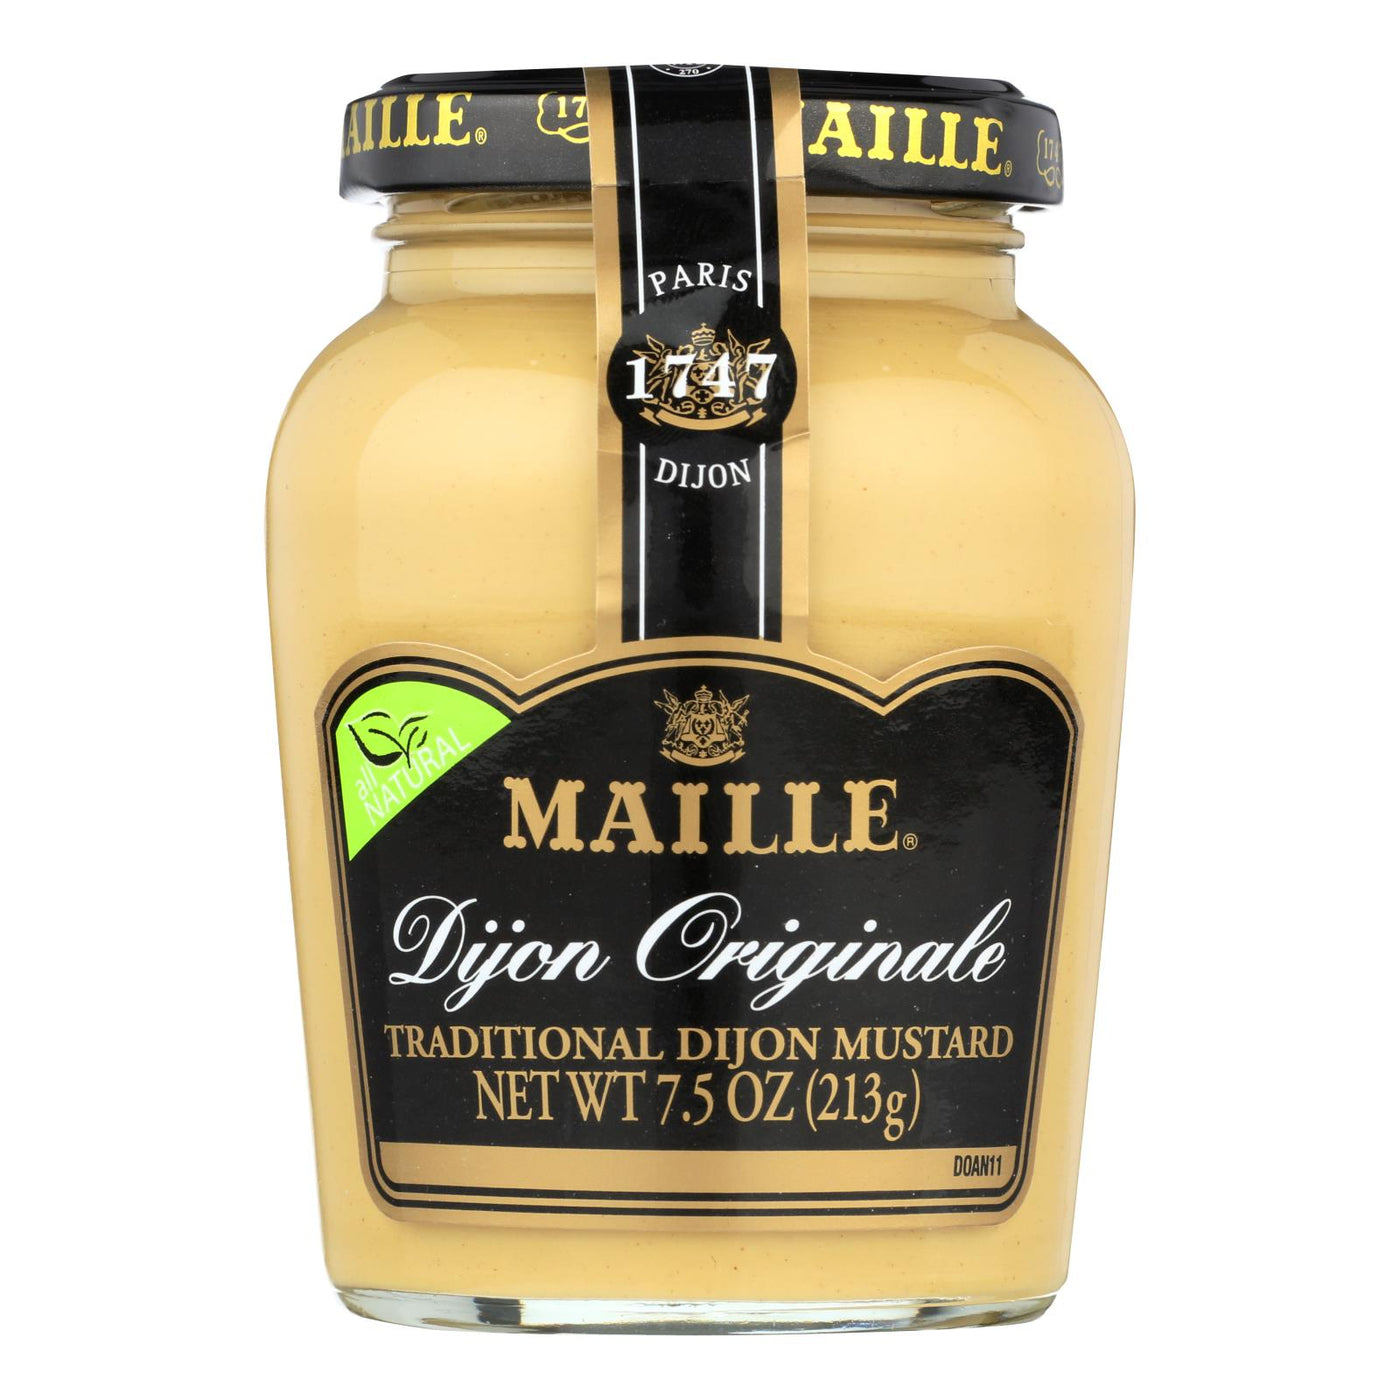 Maille Mustard - Dijon - Origale - Natural - Traditional - 7.5 Oz - Case Of 6 | OnlyNaturals.us